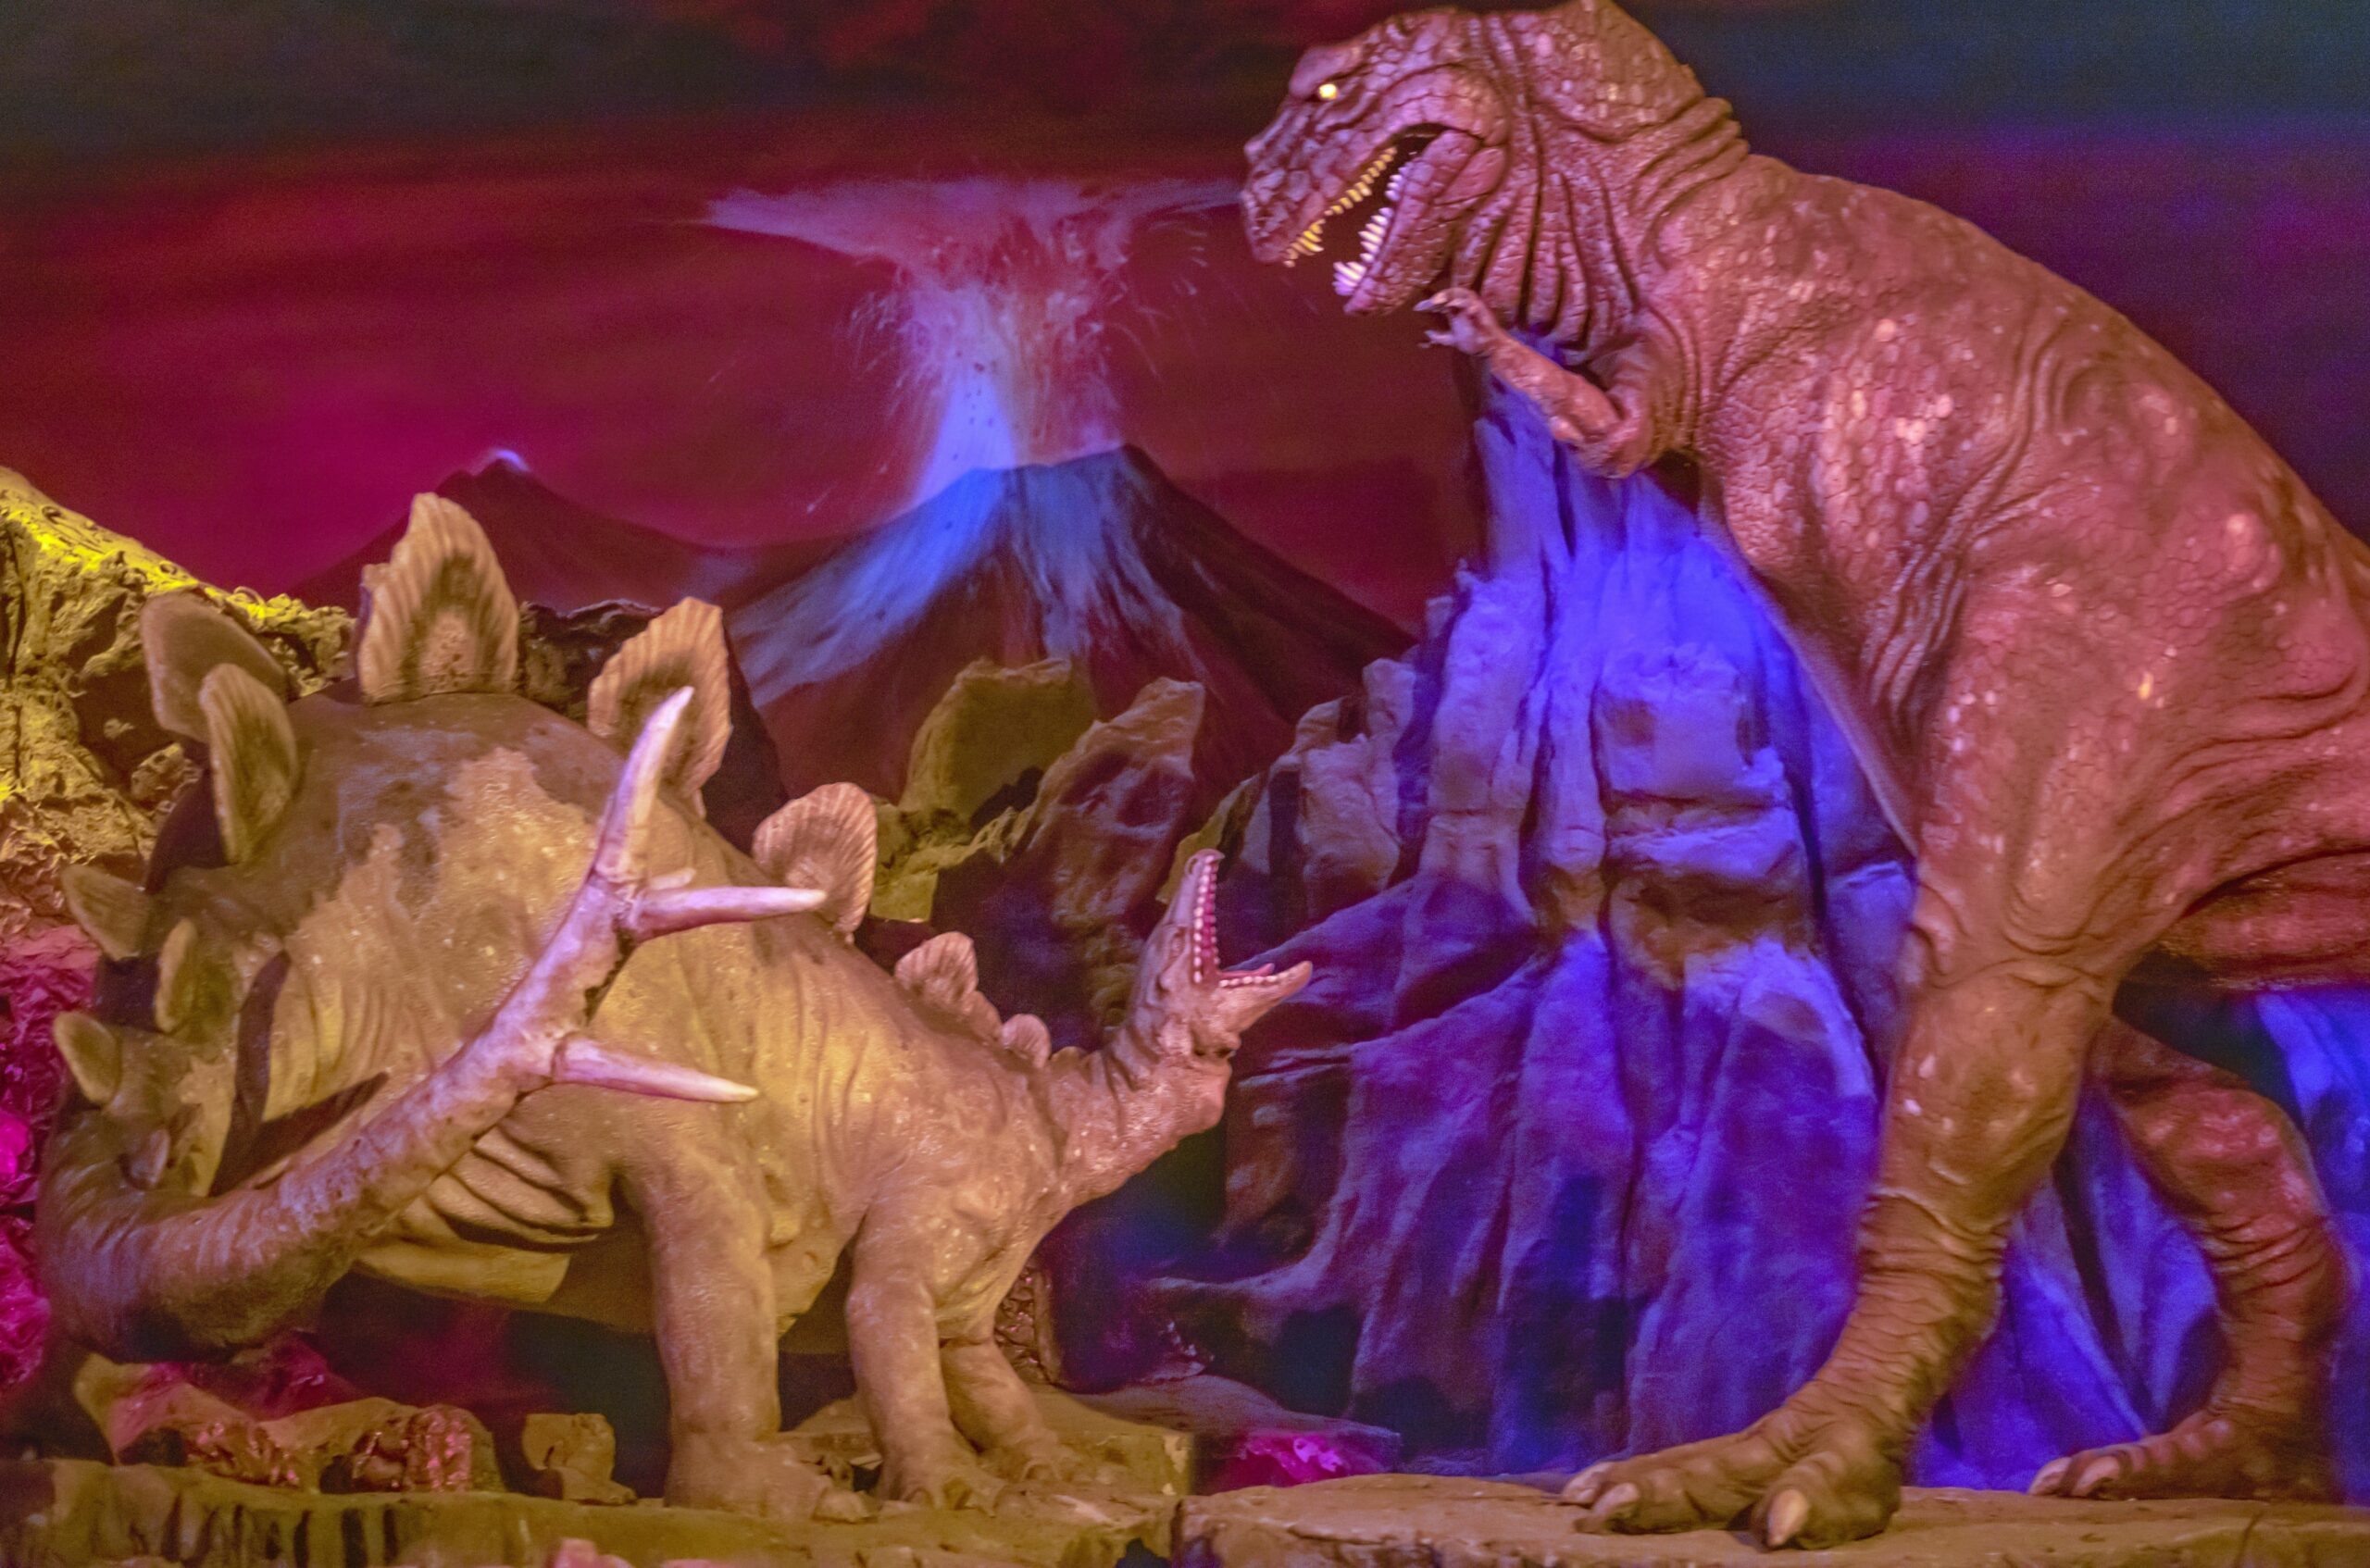 10 Things You Didn't Know About The Dinosaurs On The Disneyland Railroad